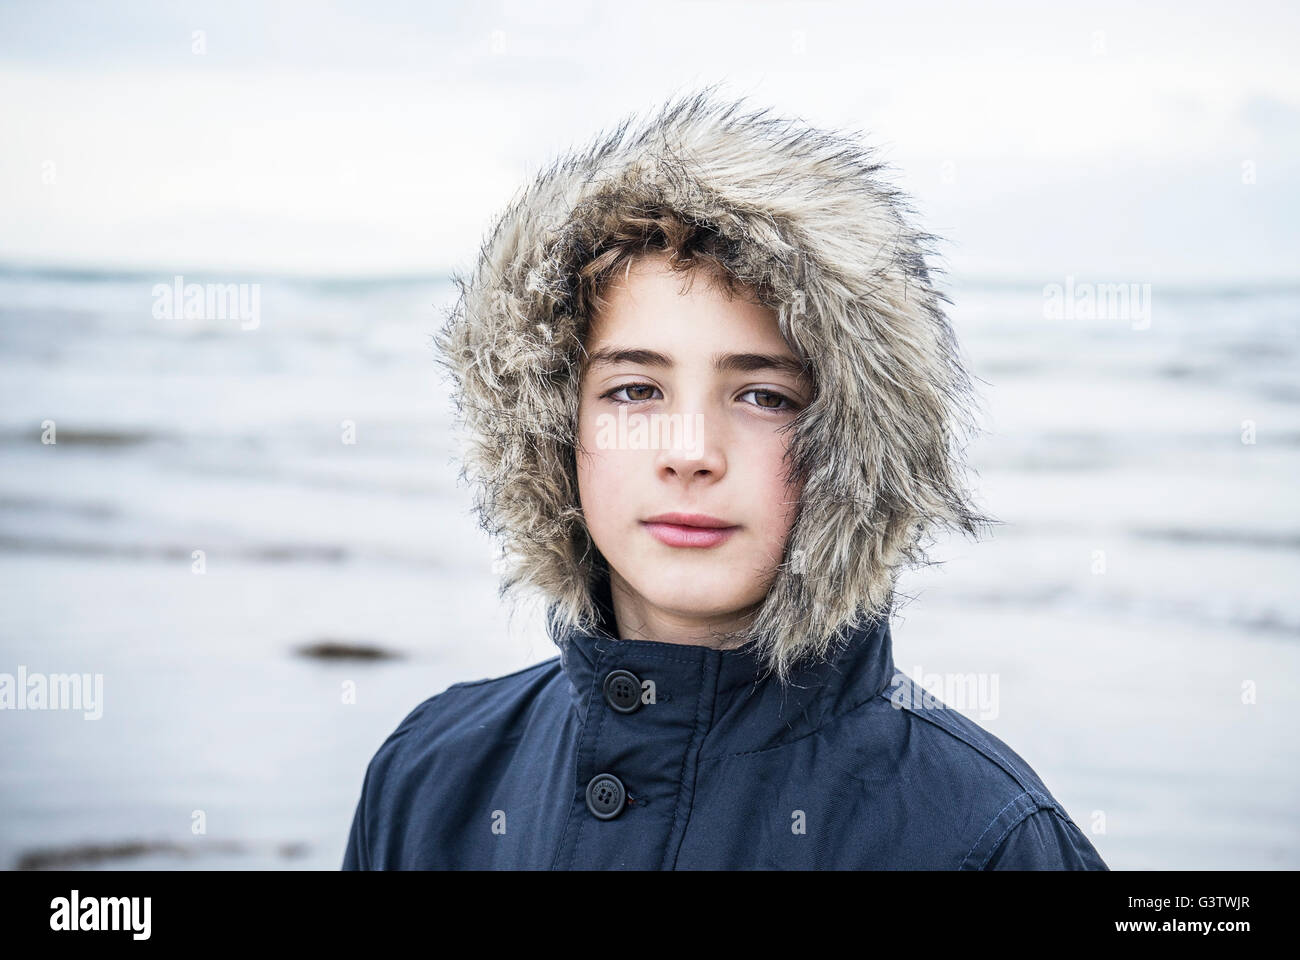 A young boy standing on the beach at Porthmadog. Stock Photo